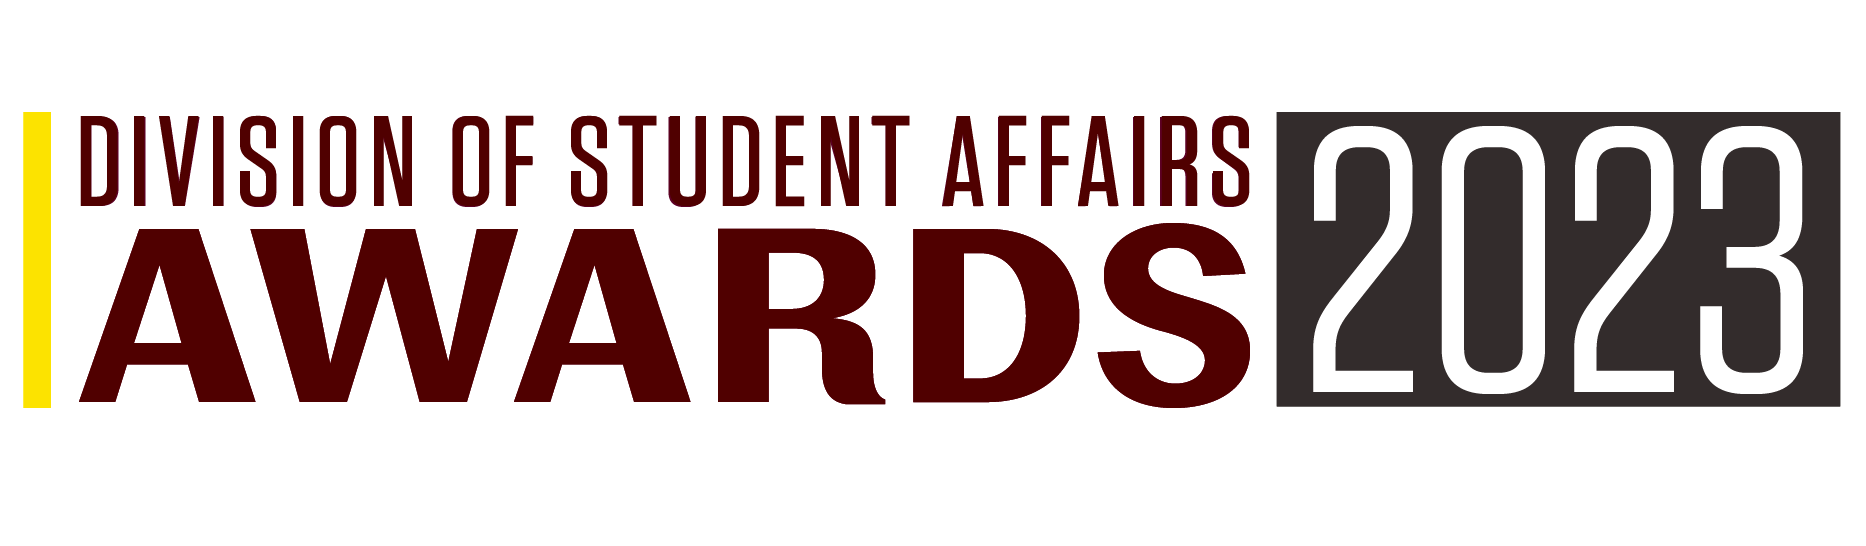 Division of Student Affairs Awards 2023